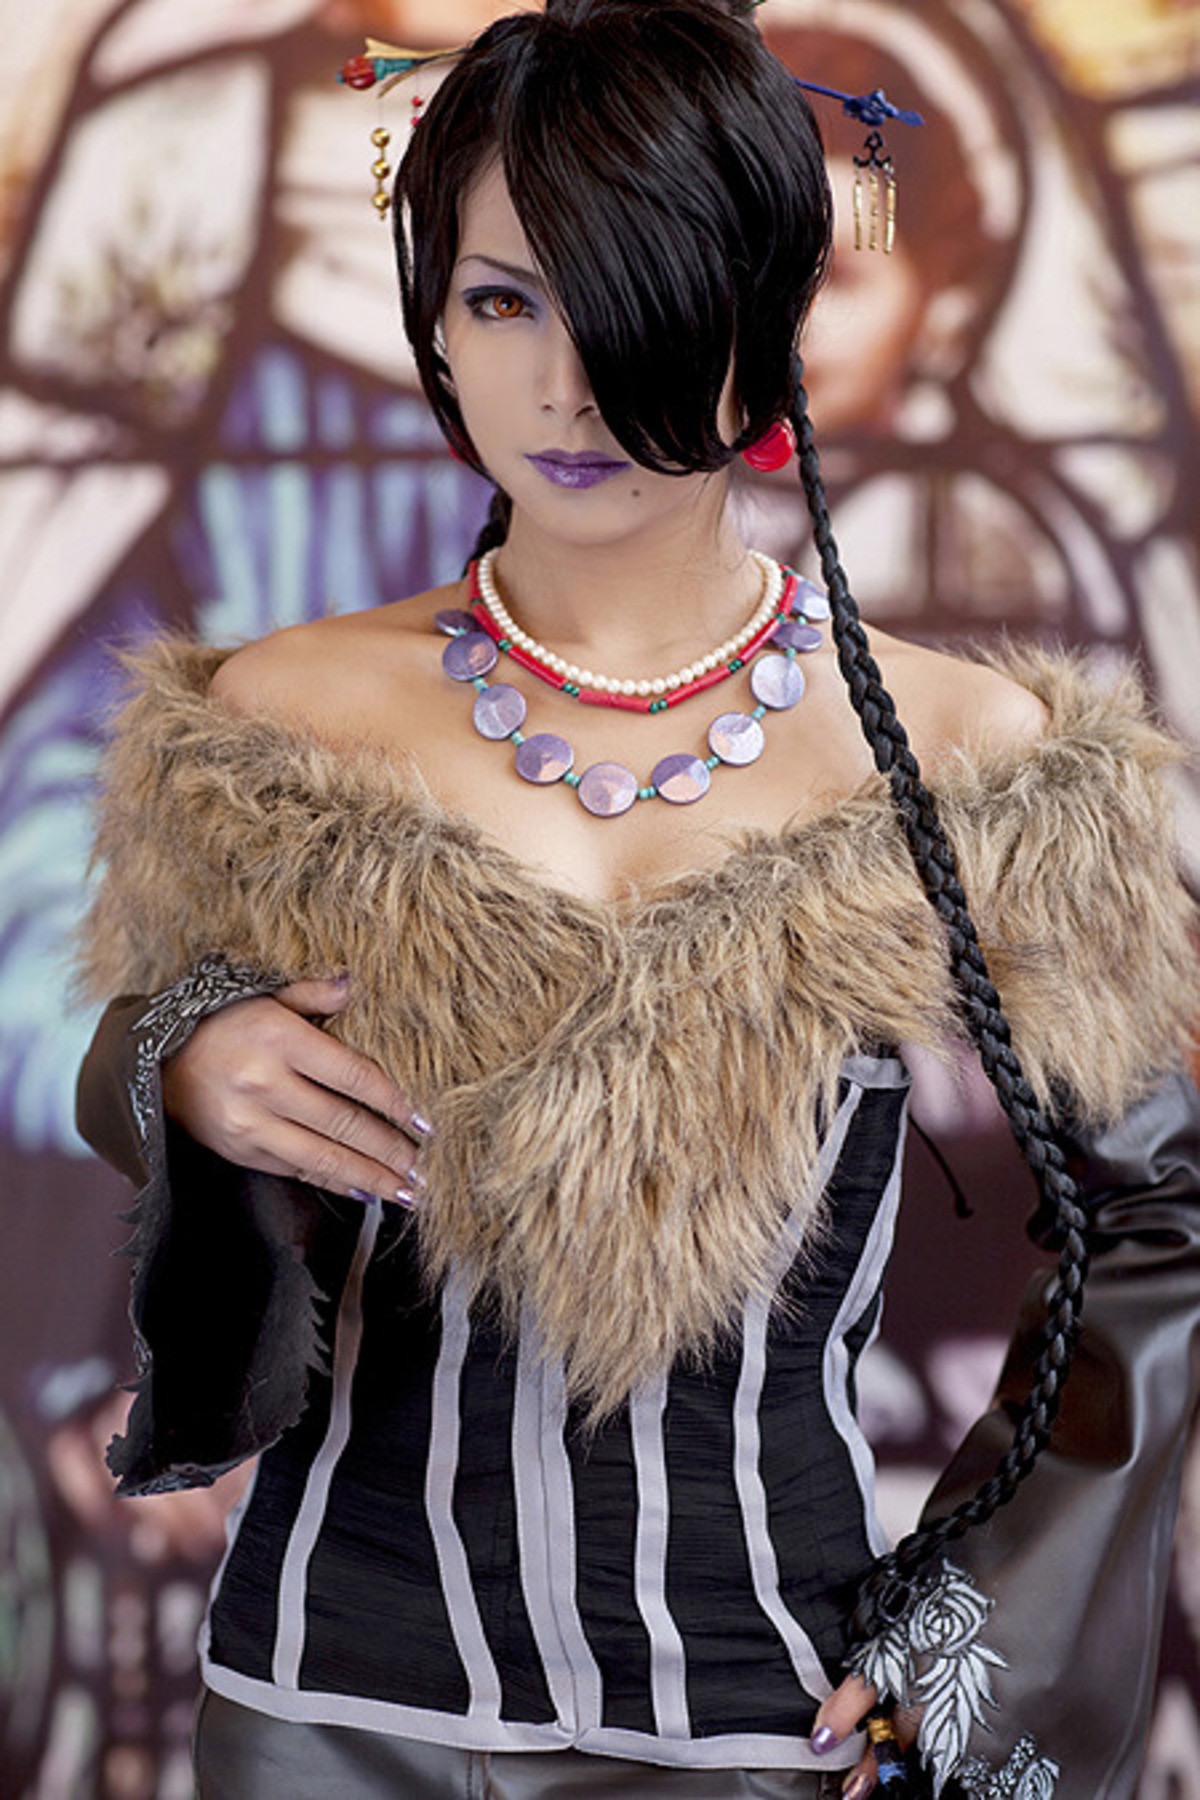 Lulu from Final Fantasy X cosplay. .. doesnt even show the lower part of the dress made of a million belts come on now the fashion is the best part of these characters